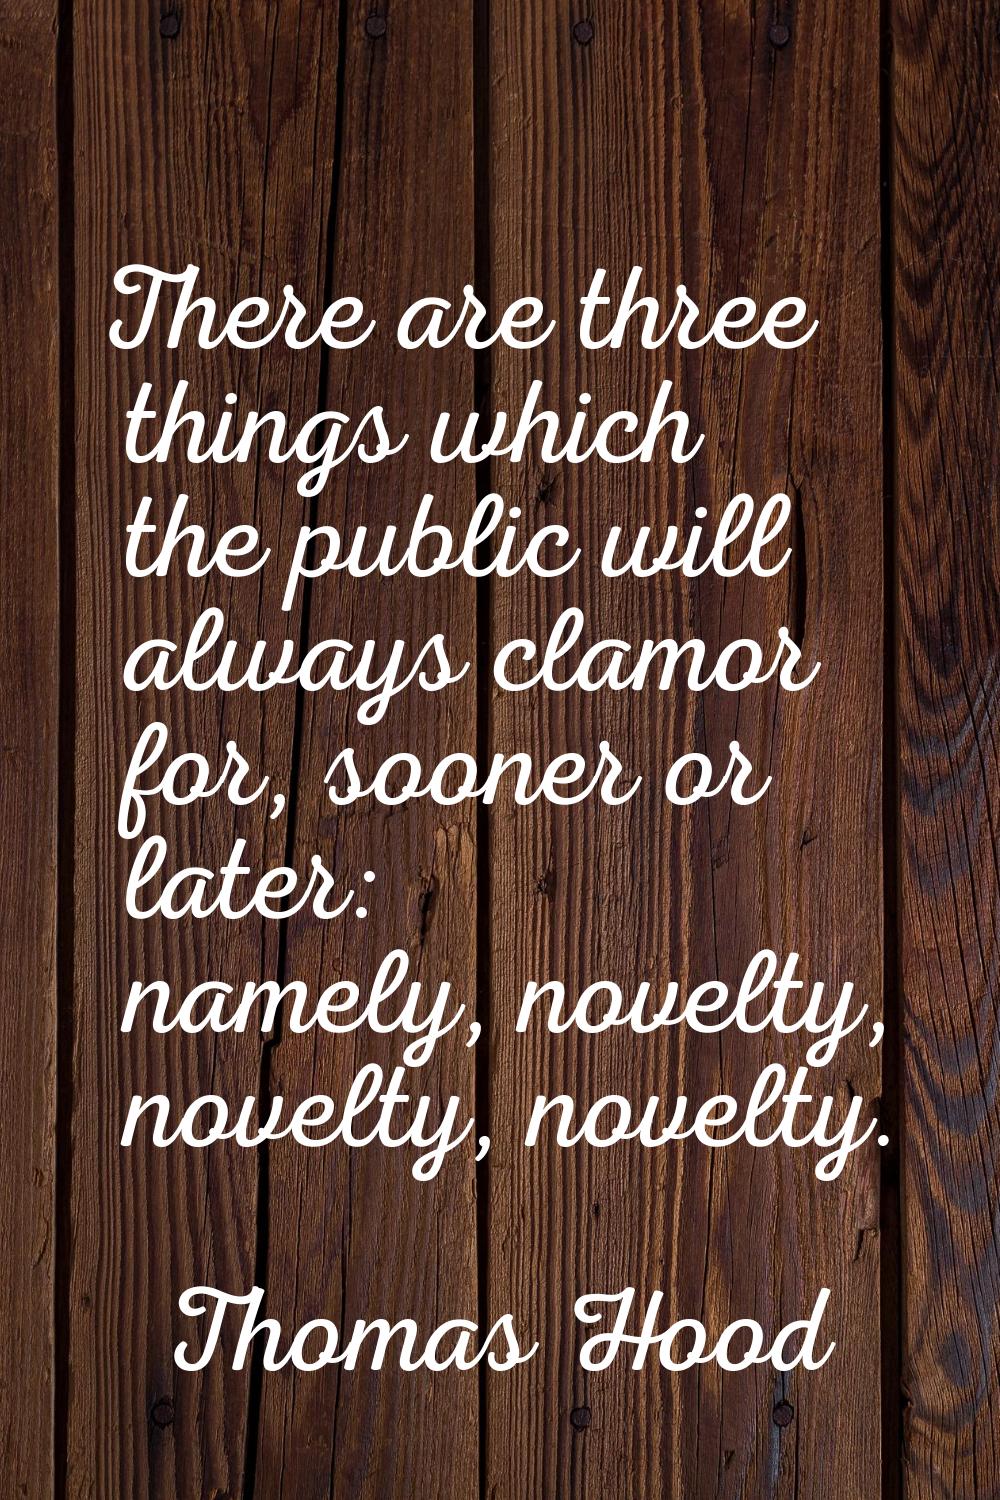 There are three things which the public will always clamor for, sooner or later: namely, novelty, n